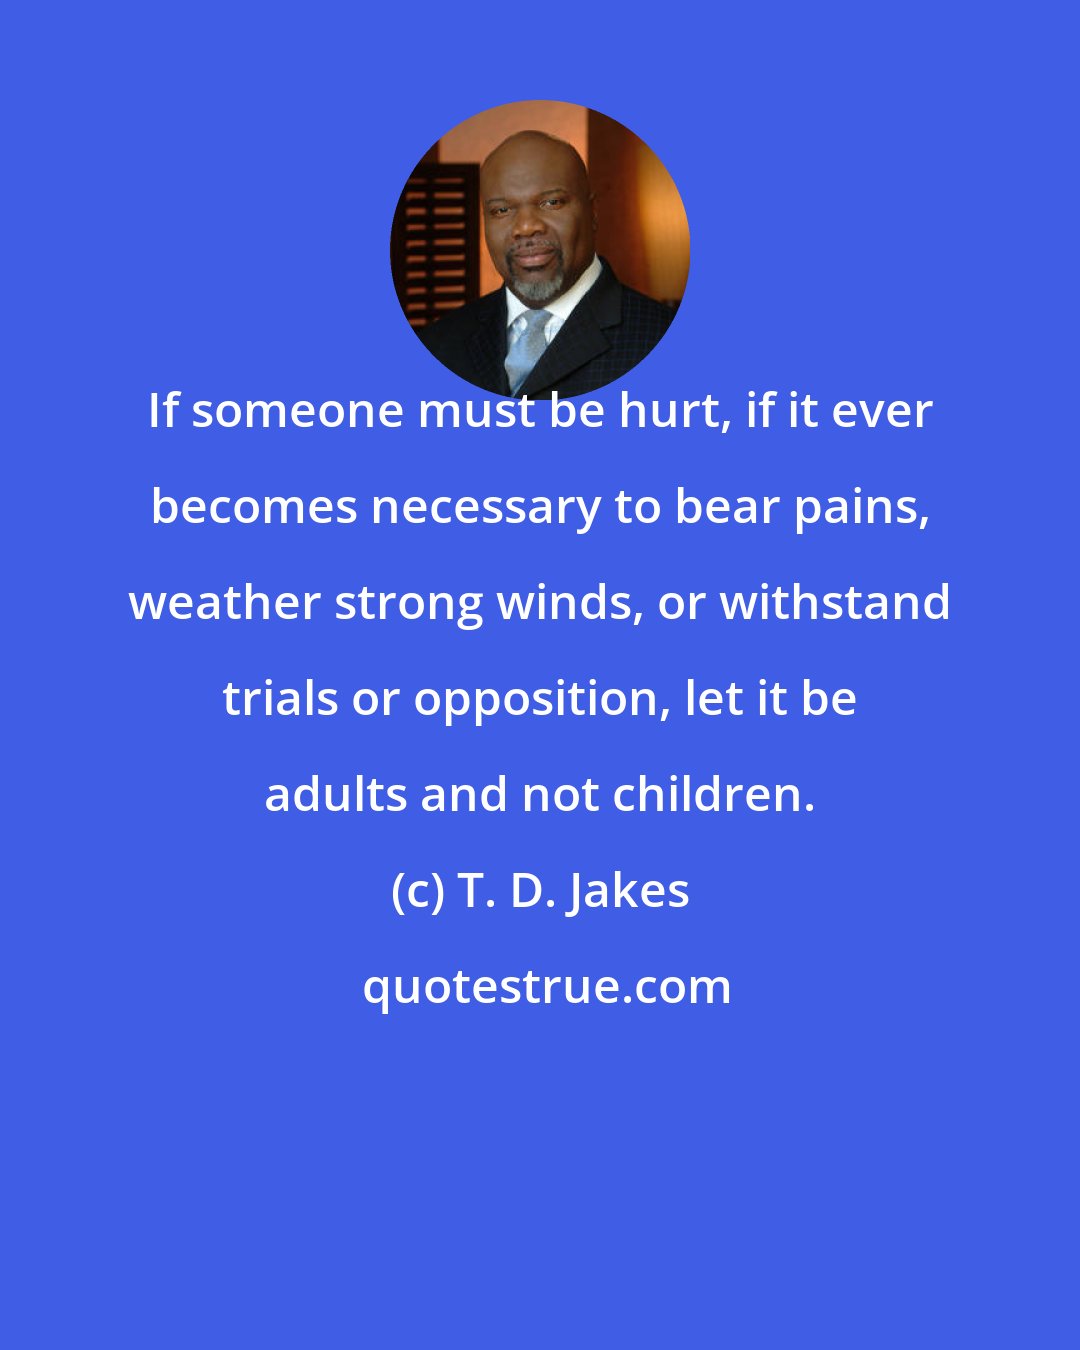 T. D. Jakes: If someone must be hurt, if it ever becomes necessary to bear pains, weather strong winds, or withstand trials or opposition, let it be adults and not children.